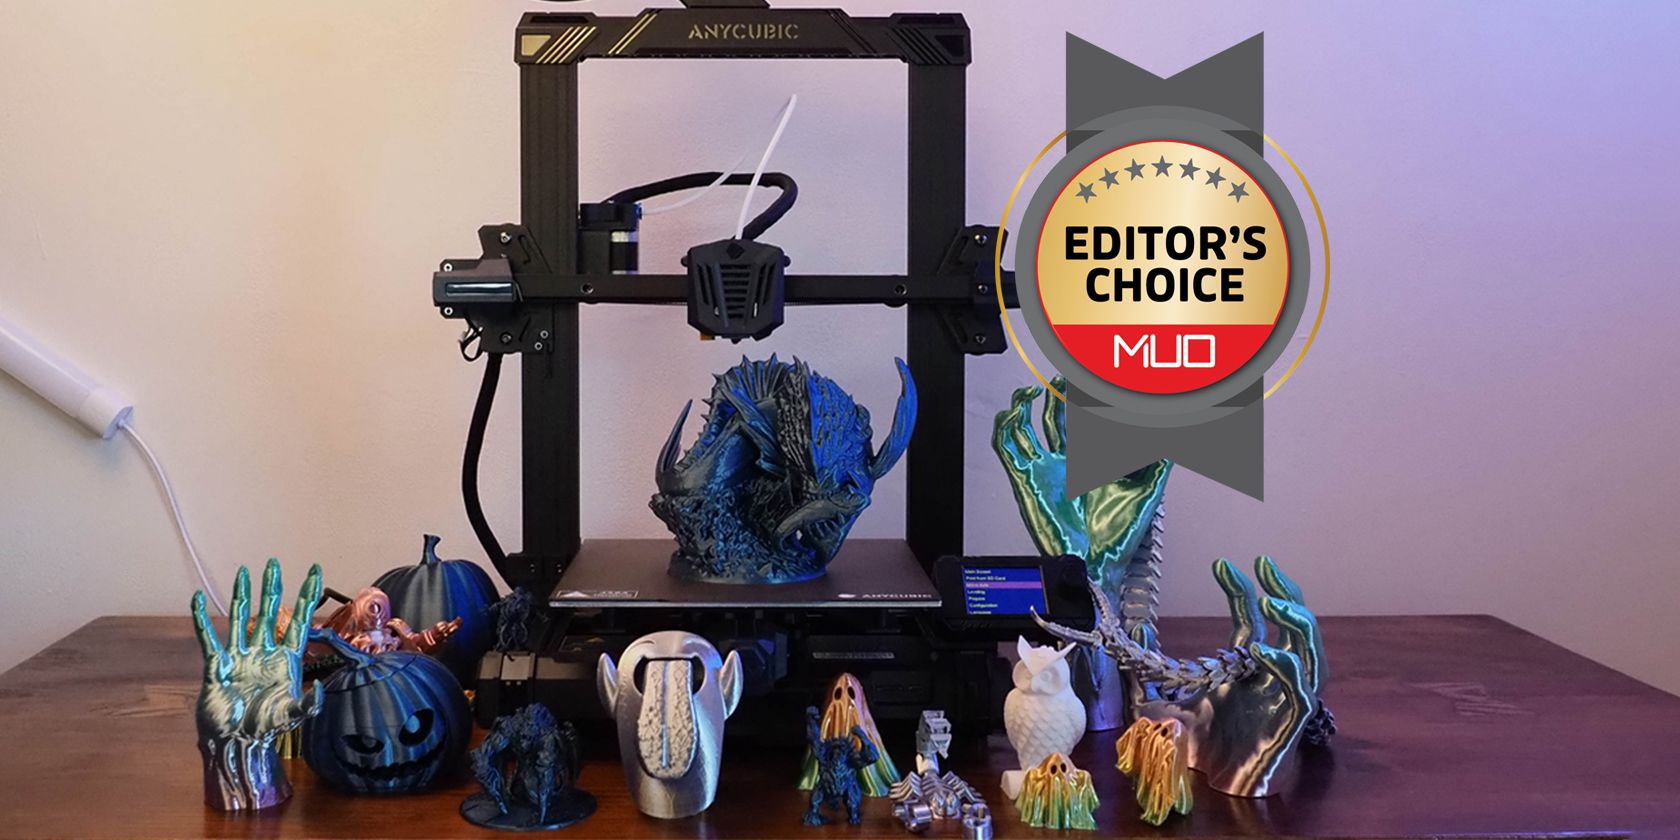 Anycubic Kobra Go Review: A Friendly DIY Intro to 3D Printing